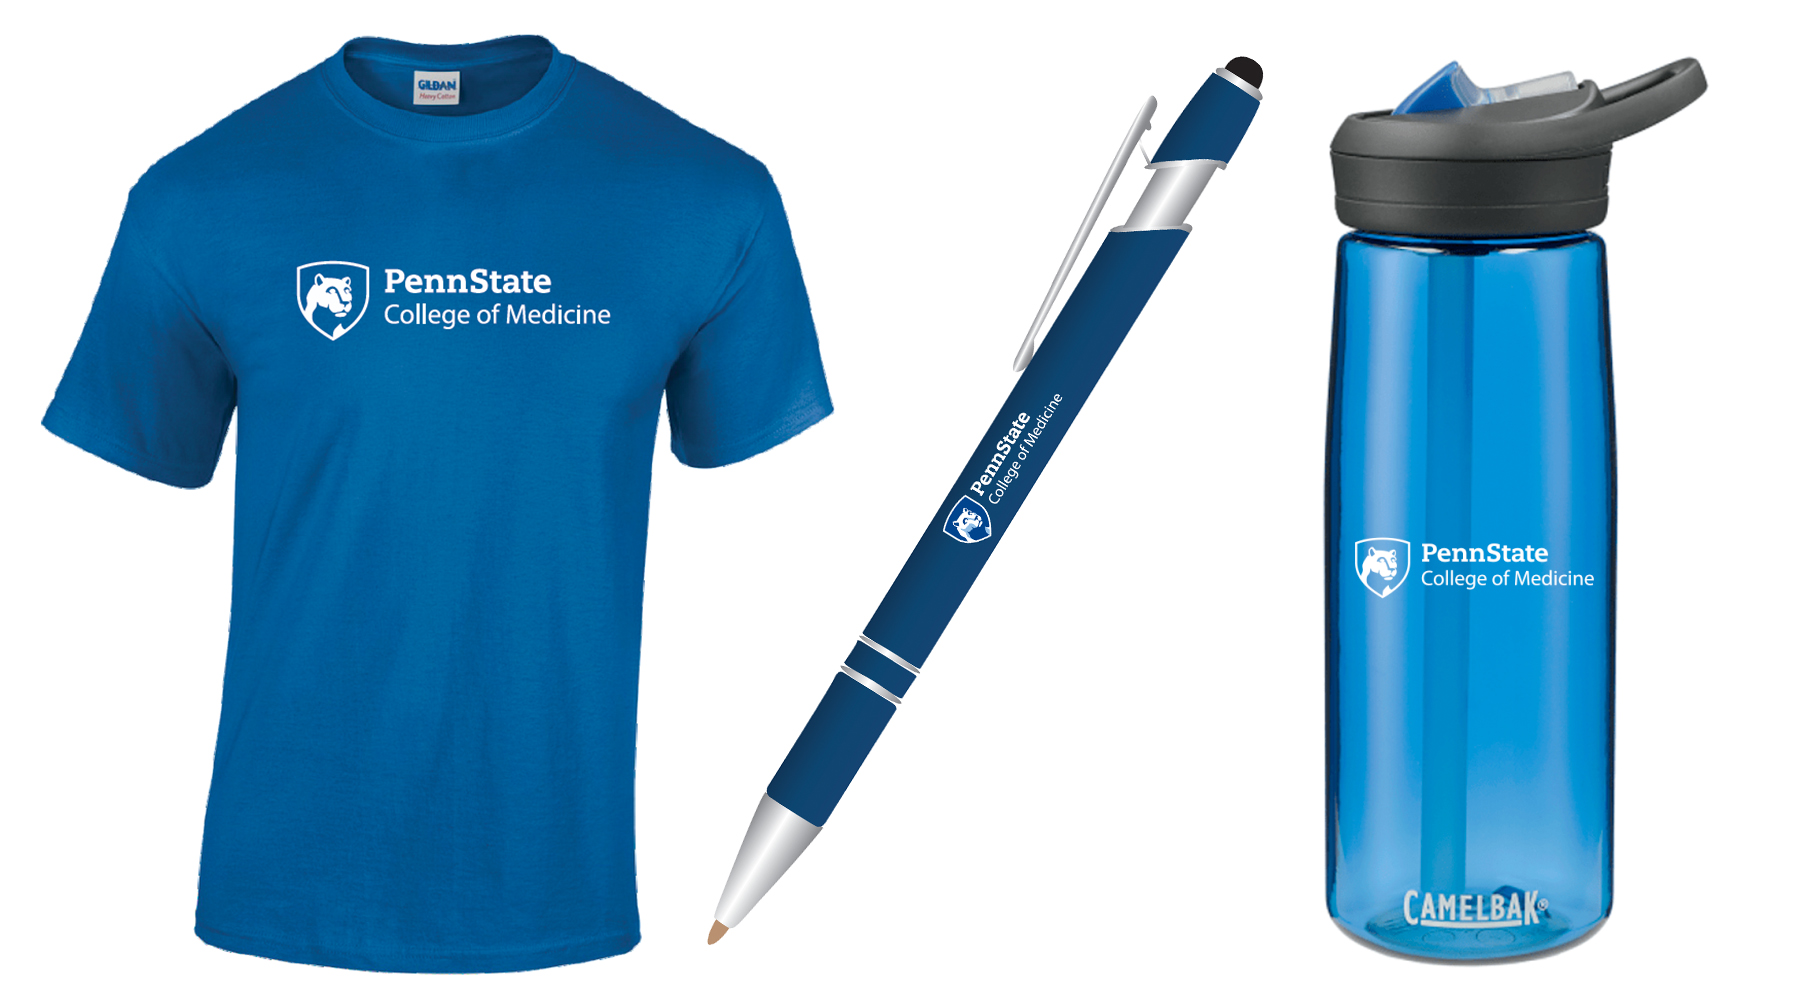  Alternate Text A shirt, pen and water bottle with Penn State College of Medicine logo on them 